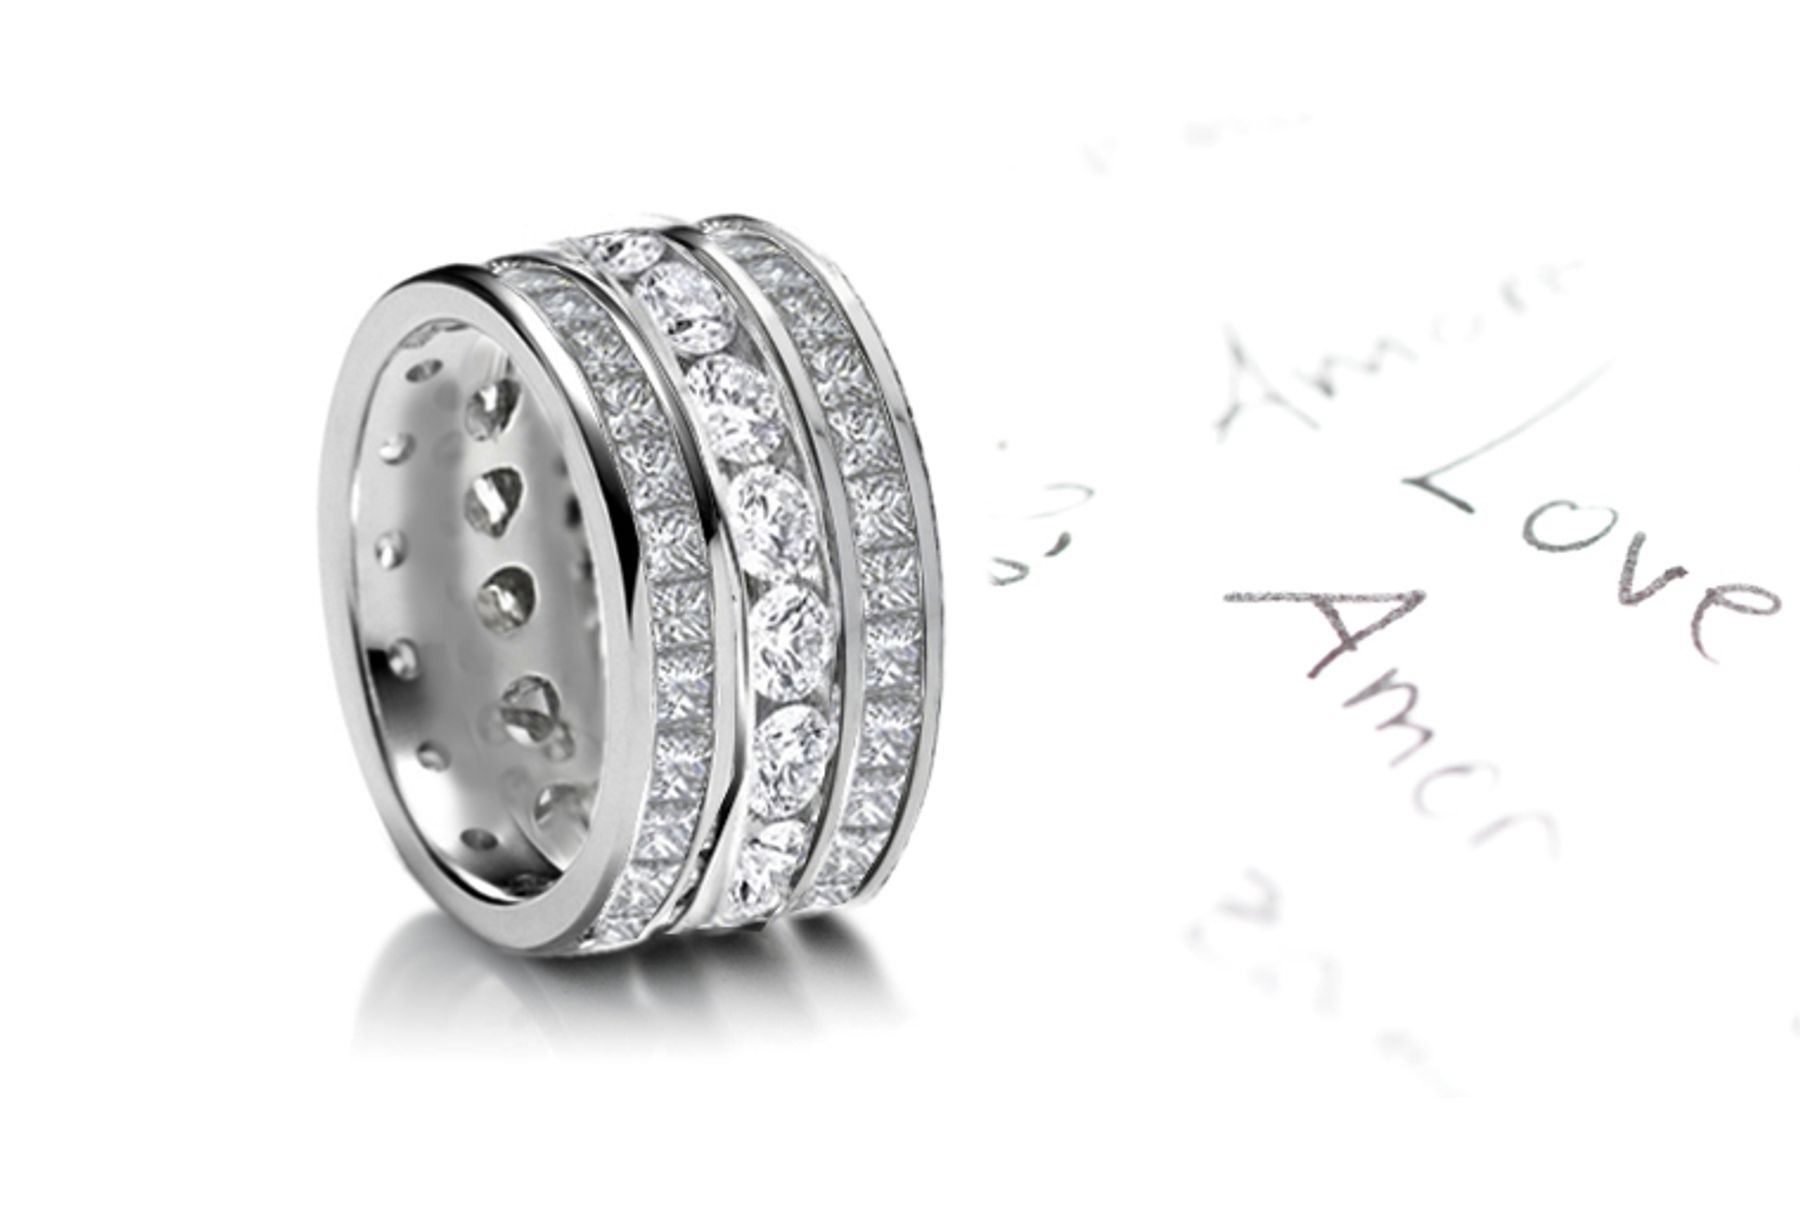 Spectacular: Stacked Trio of Round & Princess Cut Diamond Wedding Bands